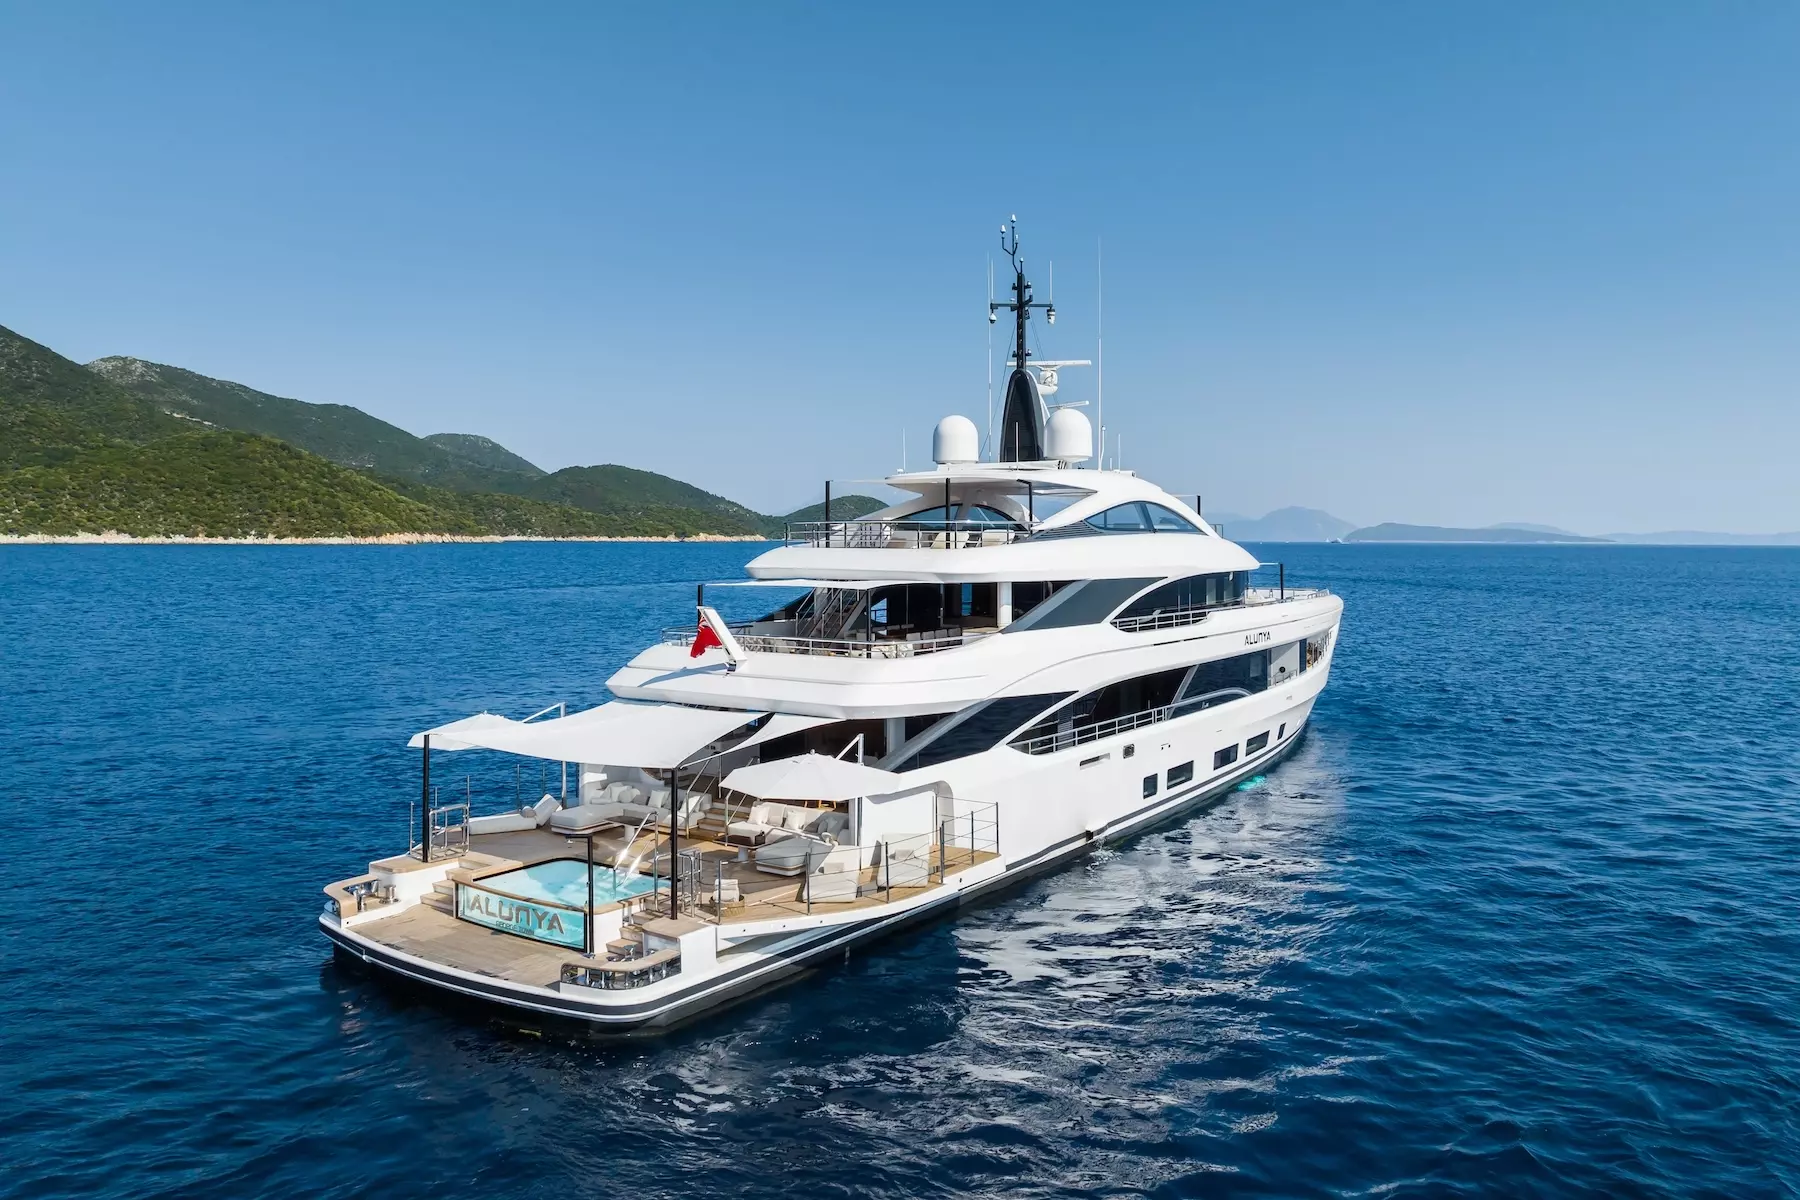 Alunya by Benetti - Special Offer for a private Superyacht Charter in Corsica with a crew